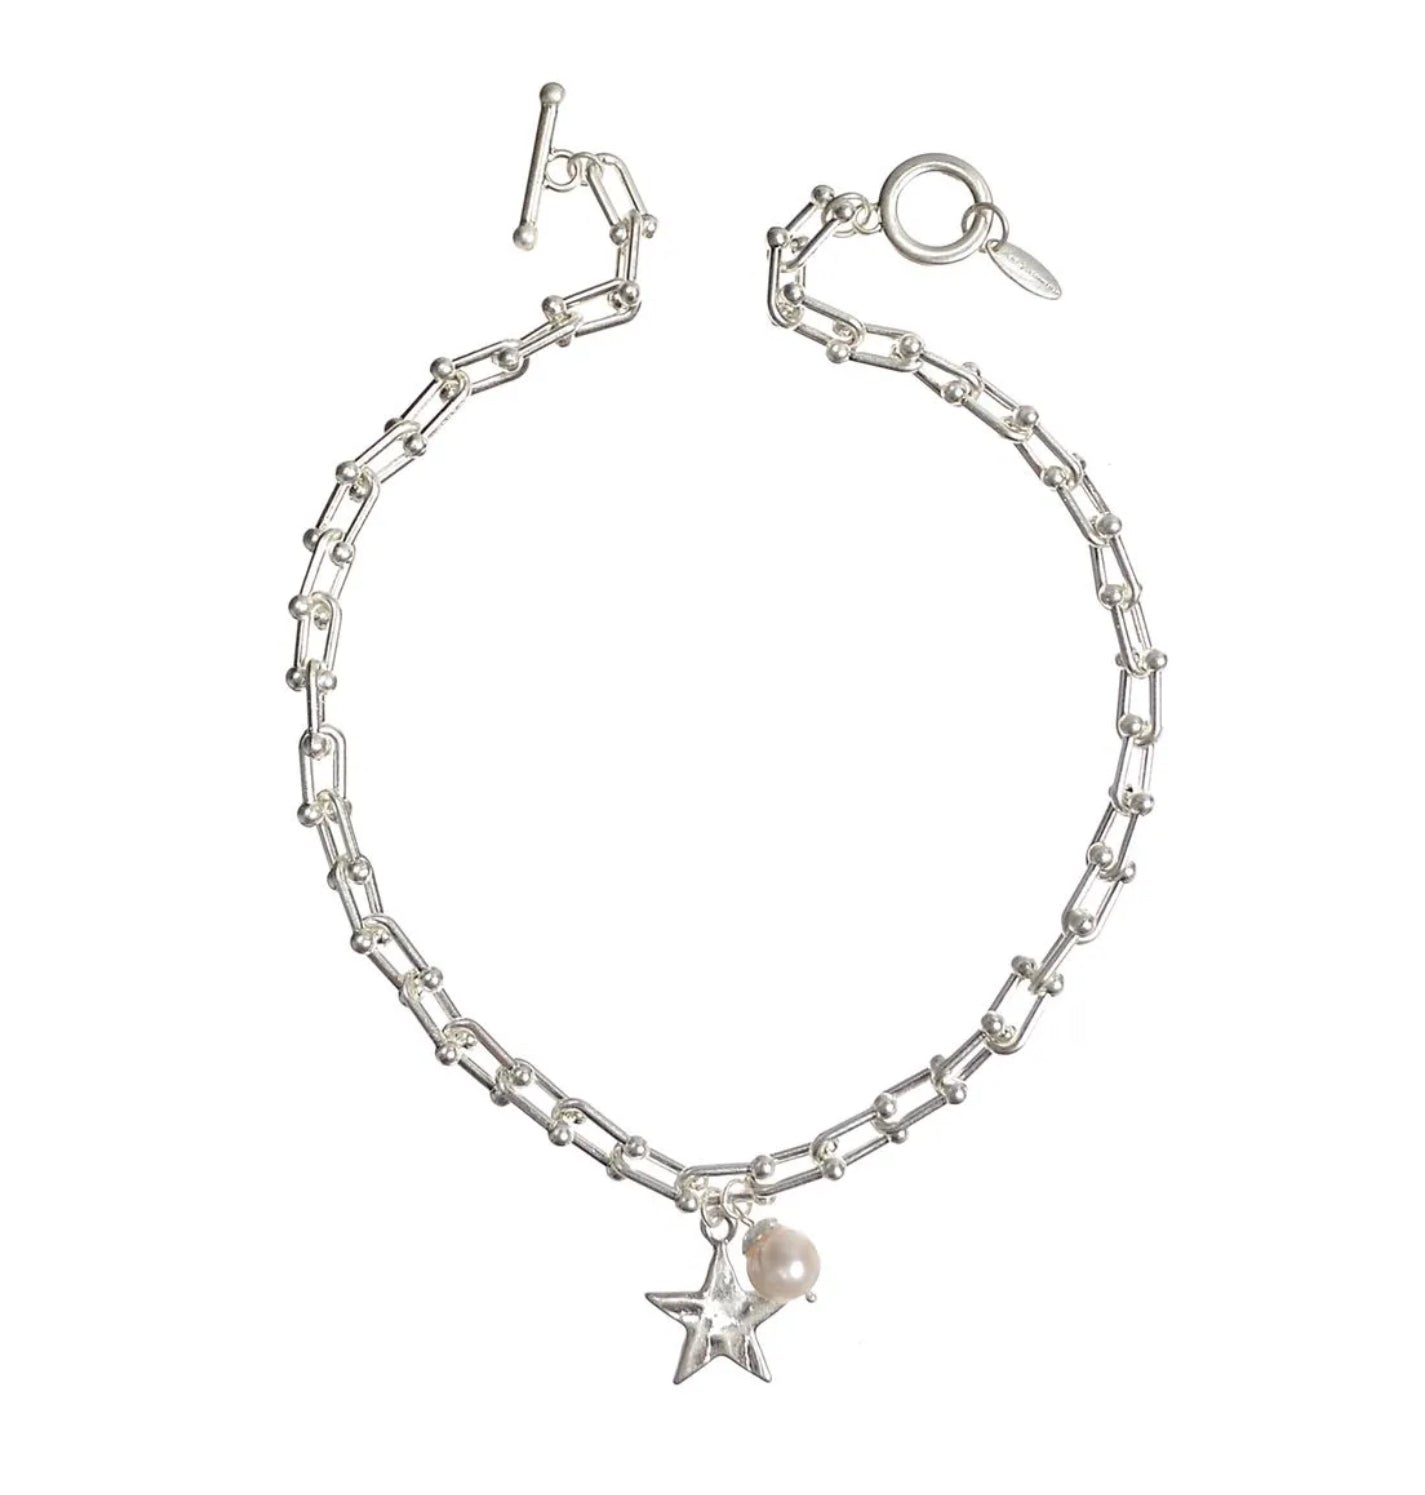 Silver star link necklace